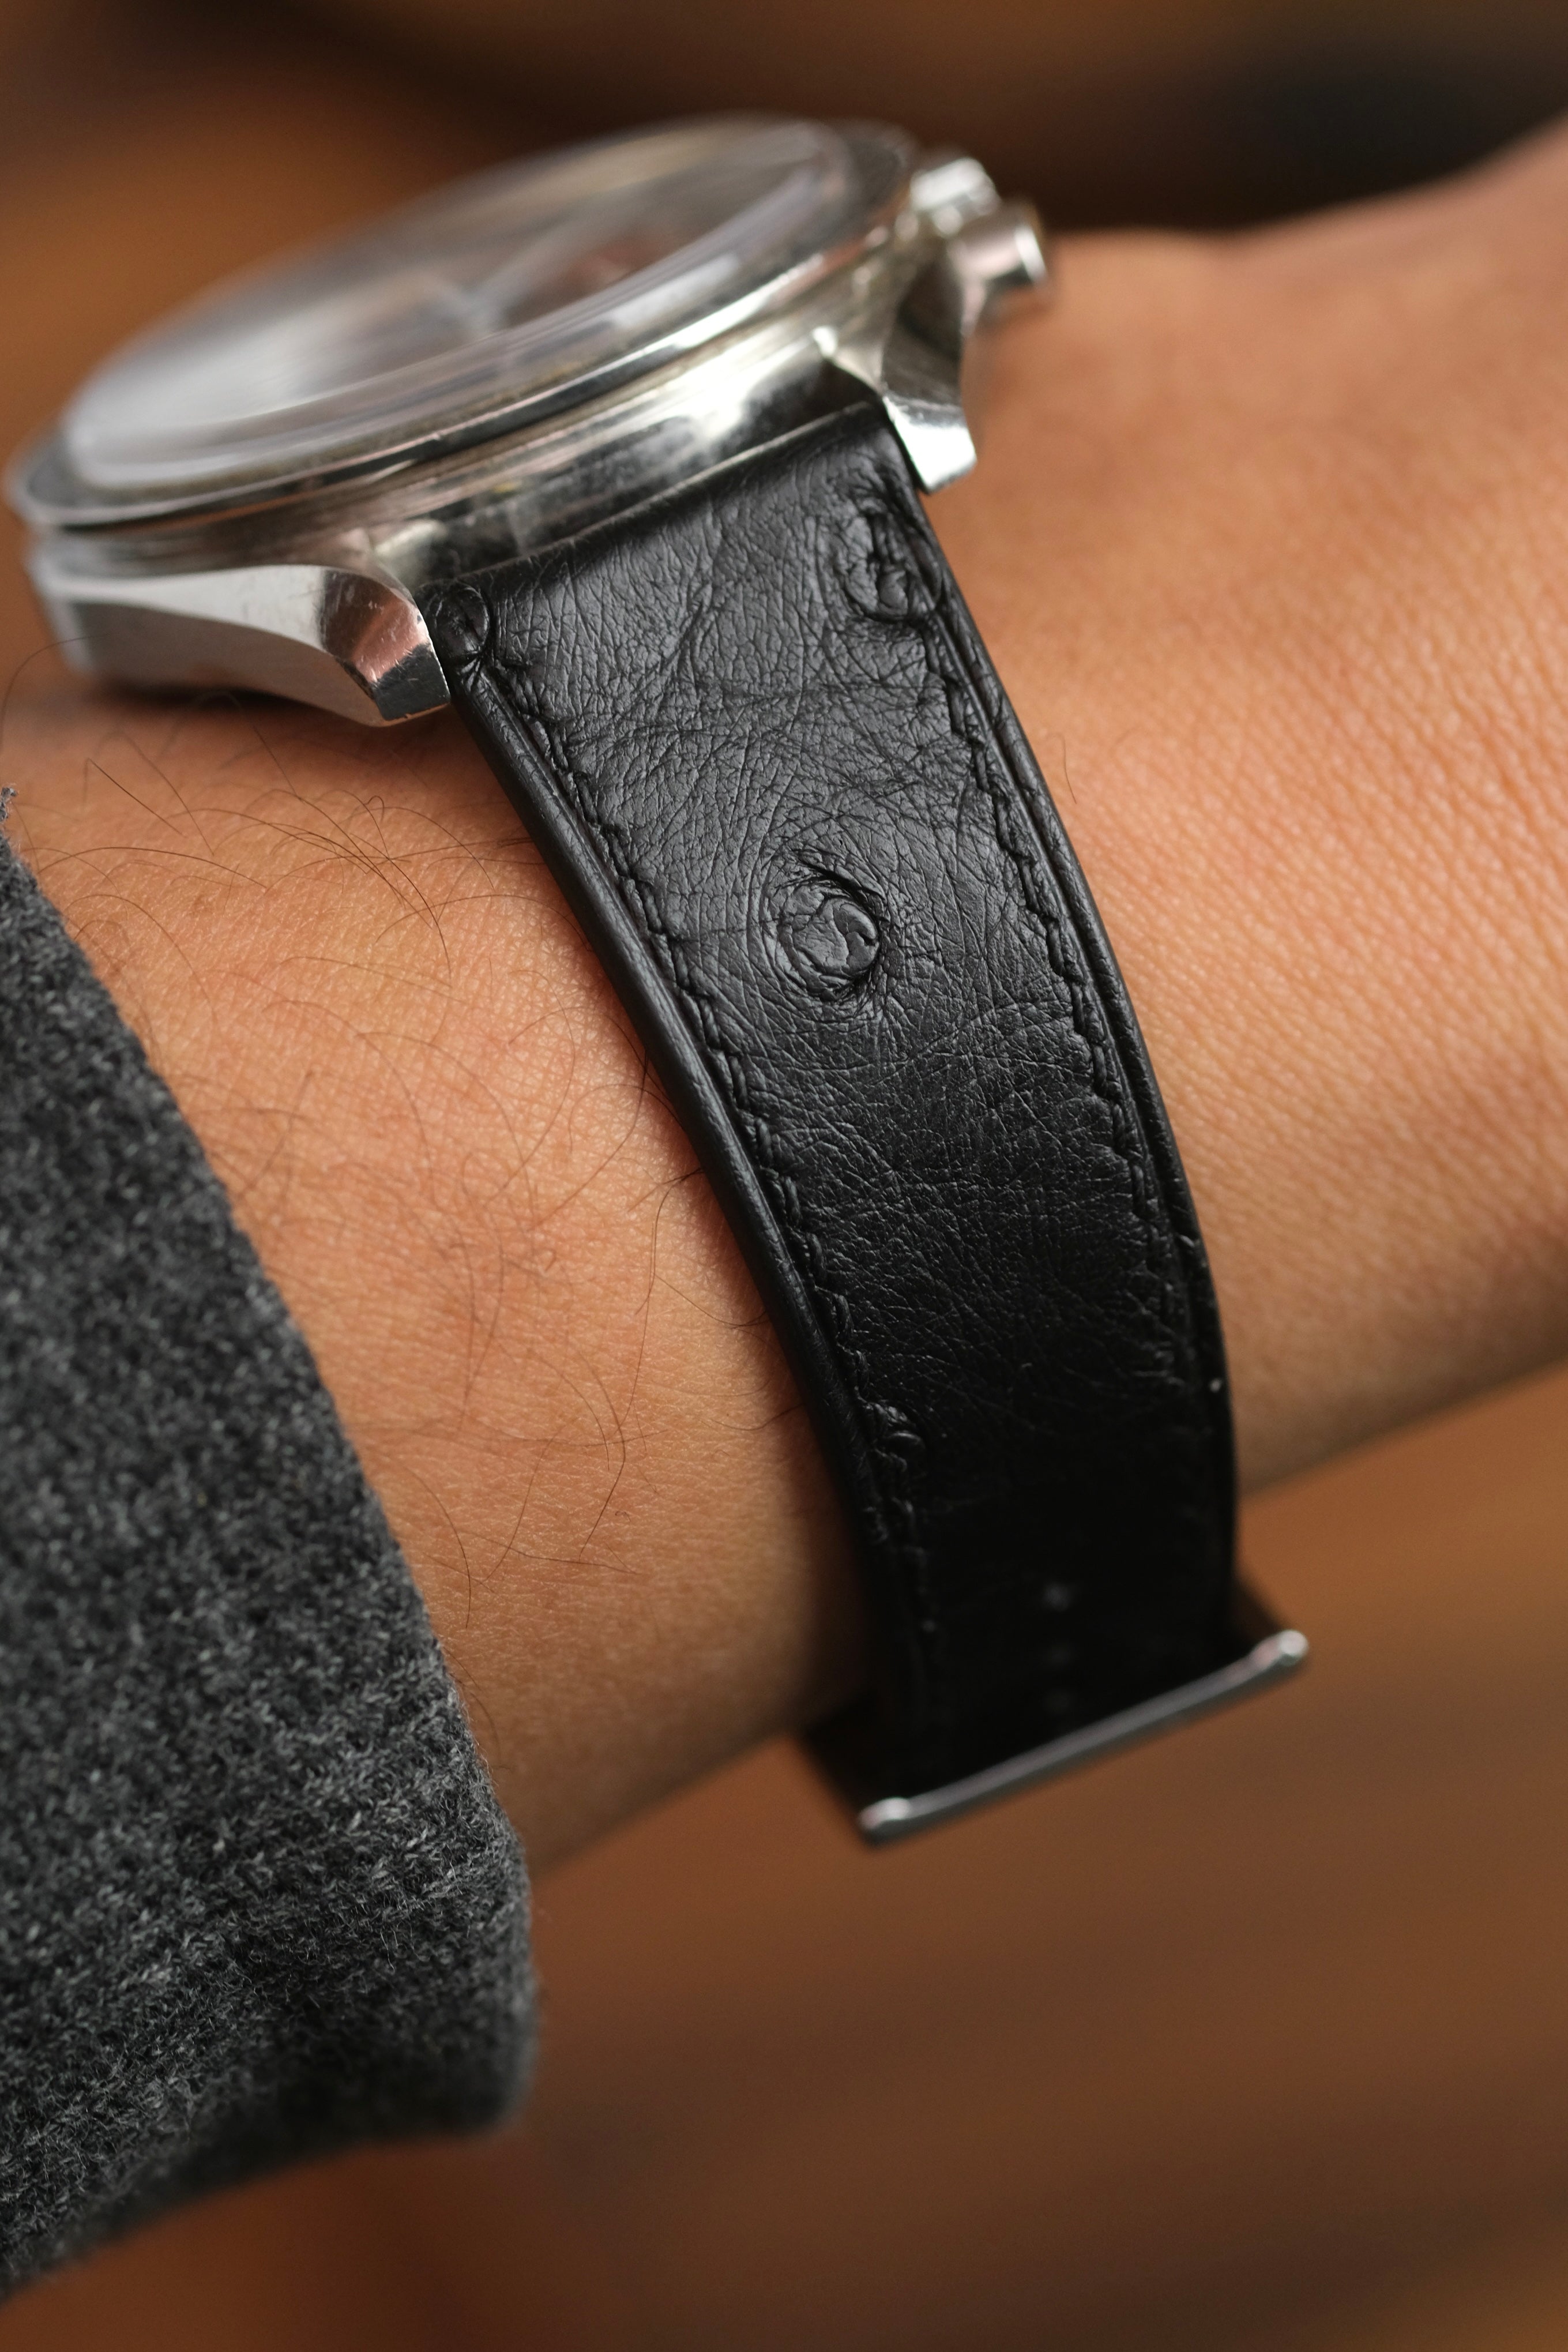 Black Ostrich Belly Leather Strap